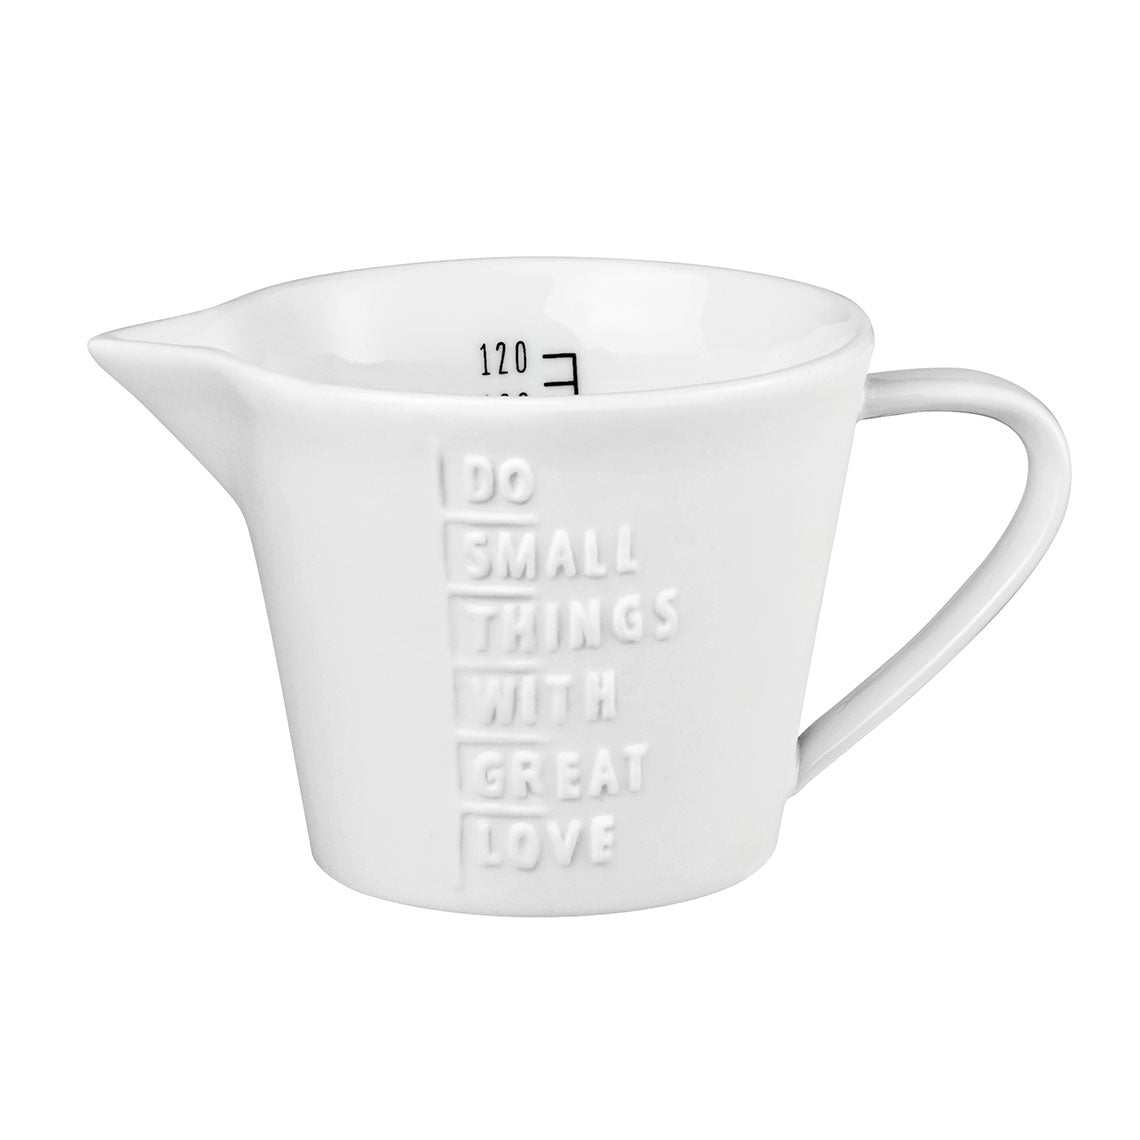 Measuring Jug Do Small Things Great Love